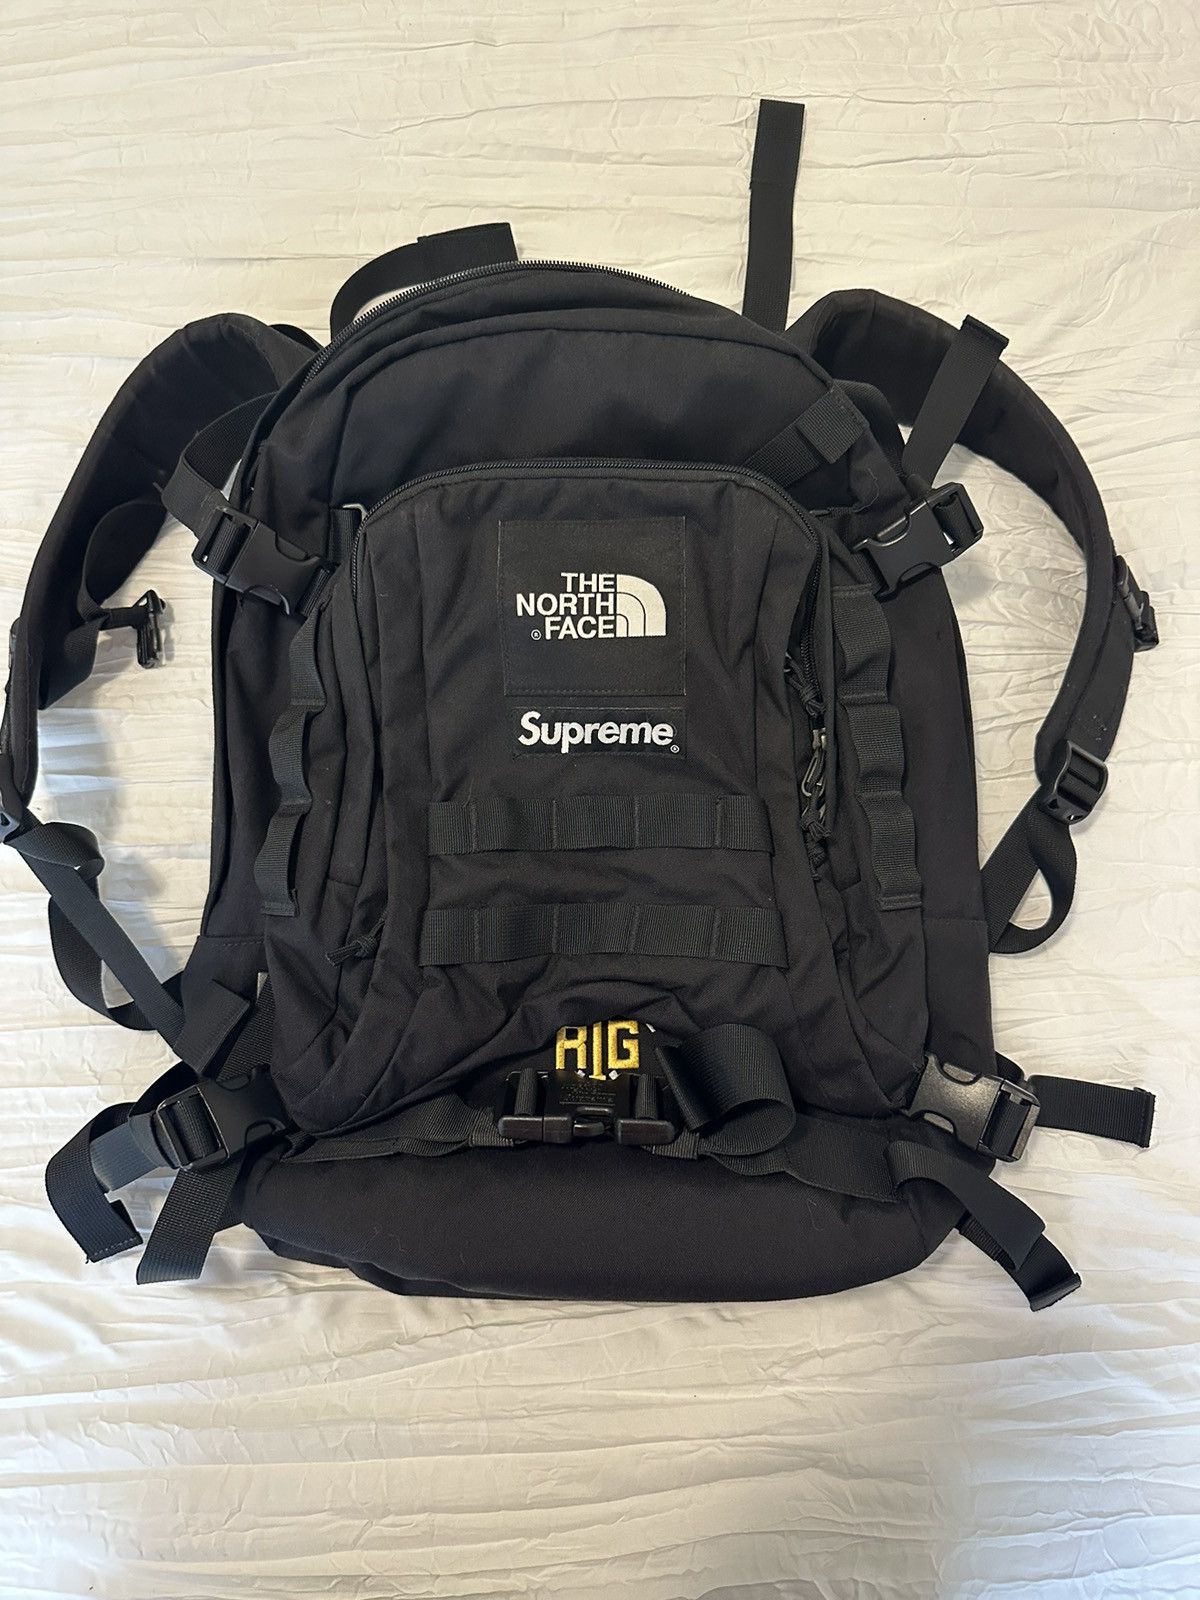 Supreme Supreme x The North Face RTG Backpack | Grailed